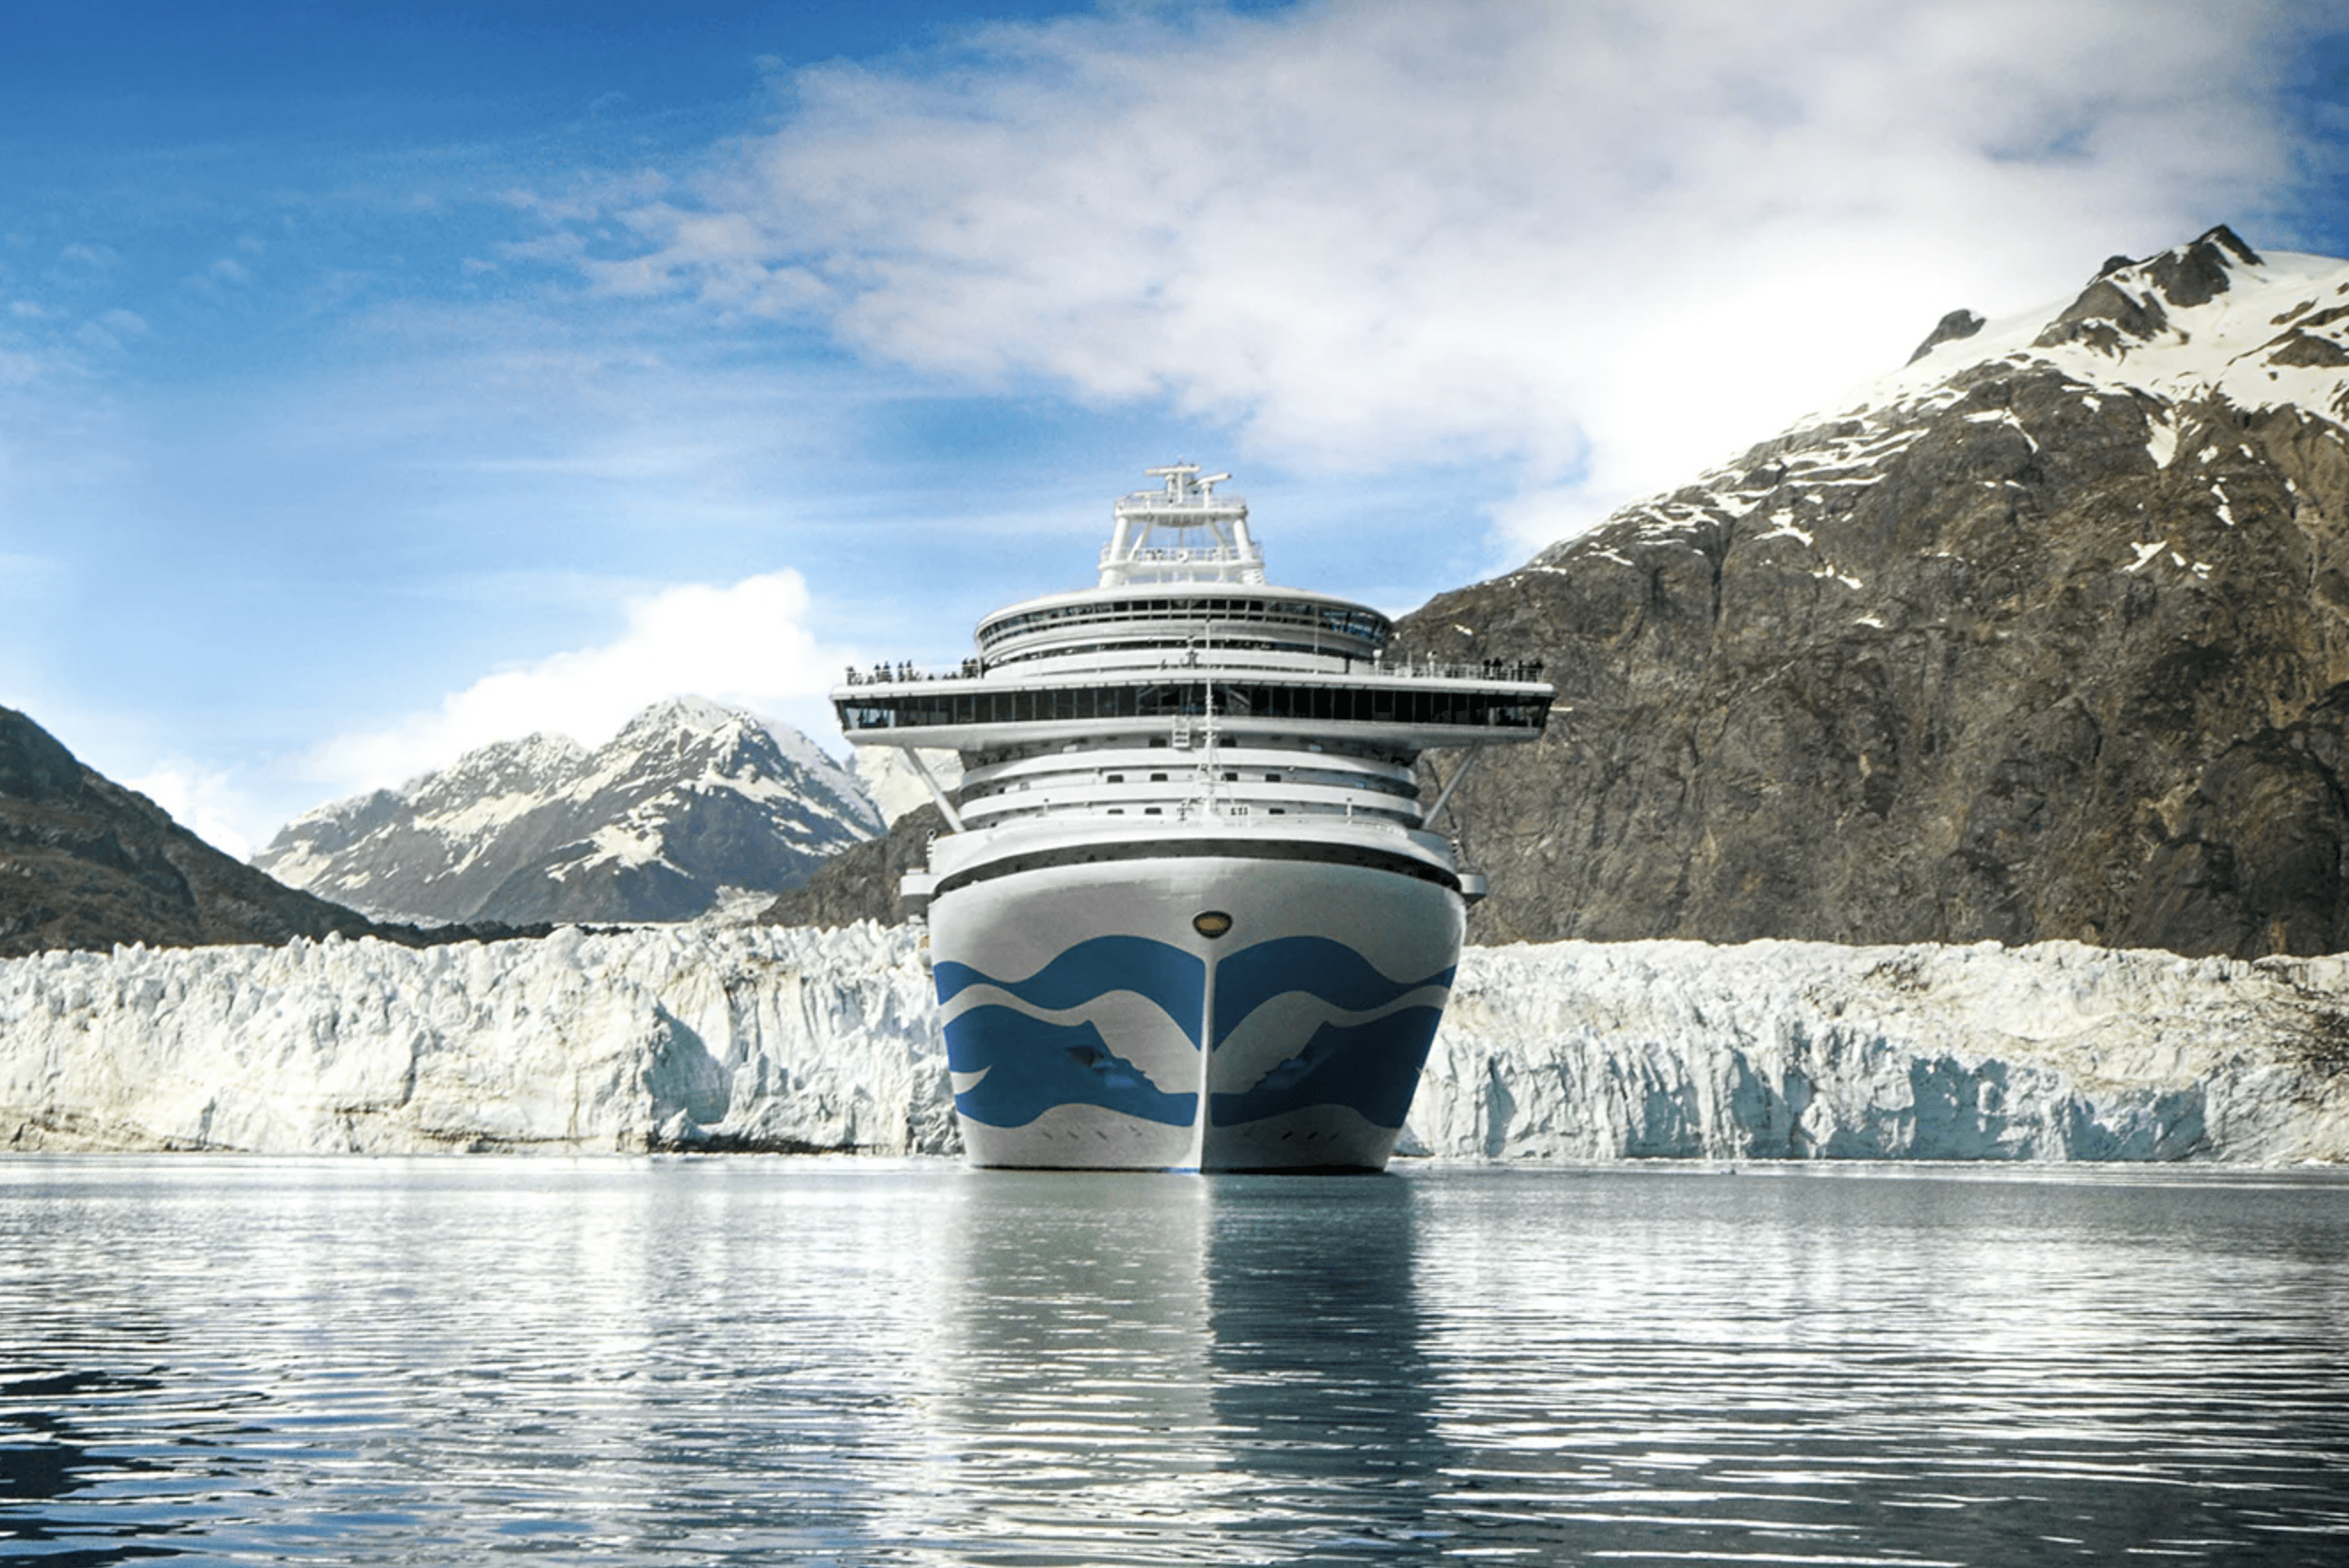 <h3><strong>Princess Cruises</strong></h3> <p><a href="https://www.princess.com/learn/cruise-destinations/alaska-cruises/?cid=bm_paidsearch_BKWS_google_Brand_Trades-Alaska_princessalaskacruise_na_na&gclid=CjwKCAjwuqiiBhBtEiwATgvixDFTidLZDjI0xOy0vhRj8rBtjrFdUNThUcNtVGLNFFd5otB5E1GC9hoCmjoQAvD_BwE&gclsrc=aw.ds" rel="noopener">Princess</a> has been cruising to Alaska for more than half a century, and they continue to lead the industry by bringing more guests to the state than any other cruise line. In fact, they introduced a generation to the idea of cruising via the hit TV show <em>The Love Boat</em>, which was set on a Princess ship and featured many episodes in Alaska! Because of their deep ties to the state, the cruise line is able to offer a variety of itineraries and shore excursions, and they even own a number of Princess Wilderness Lodges near <a href="https://www.rd.com/list/best-national-park-road-trips/" rel="noopener noreferrer">national parks</a>, so you can add a land extension to your trip.</p> <p>Onboard, there are plenty of activities for both adults and kids, including the North to Alaska enrichment program, which brings the state's culture to you so you can sample fresh Alaska seafood and hear from local celebs like Libby Riddles, the first woman to win the 1,100-mile Iditarod sled dog race.</p> <p><strong>Pros:</strong></p> <ul> <li>Guests can meet Alaskan Huskies on the ship through Puppies in the Piazza!</li> <li>So many options for cruise length, extensions and land and sea packages</li> </ul> <p><strong>Con: </strong></p> <ul> <li>Price is not all-inclusive</li> </ul> <p class="listicle-page__cta-button-shop"><a class="shop-btn" href="https://www.princess.com/learn/cruise-destinations/alaska-cruises/?cid=bm_paidsearch_BKWS_google_Brand_Trades-Alaska_princessalaskacruise_na_na&gclid=CjwKCAjwuqiiBhBtEiwATgvixDFTidLZDjI0xOy0vhRj8rBtjrFdUNThUcNtVGLNFFd5otB5E1GC9hoCmjoQAvD_BwE&gclsrc=aw.ds">Book Now</a></p>